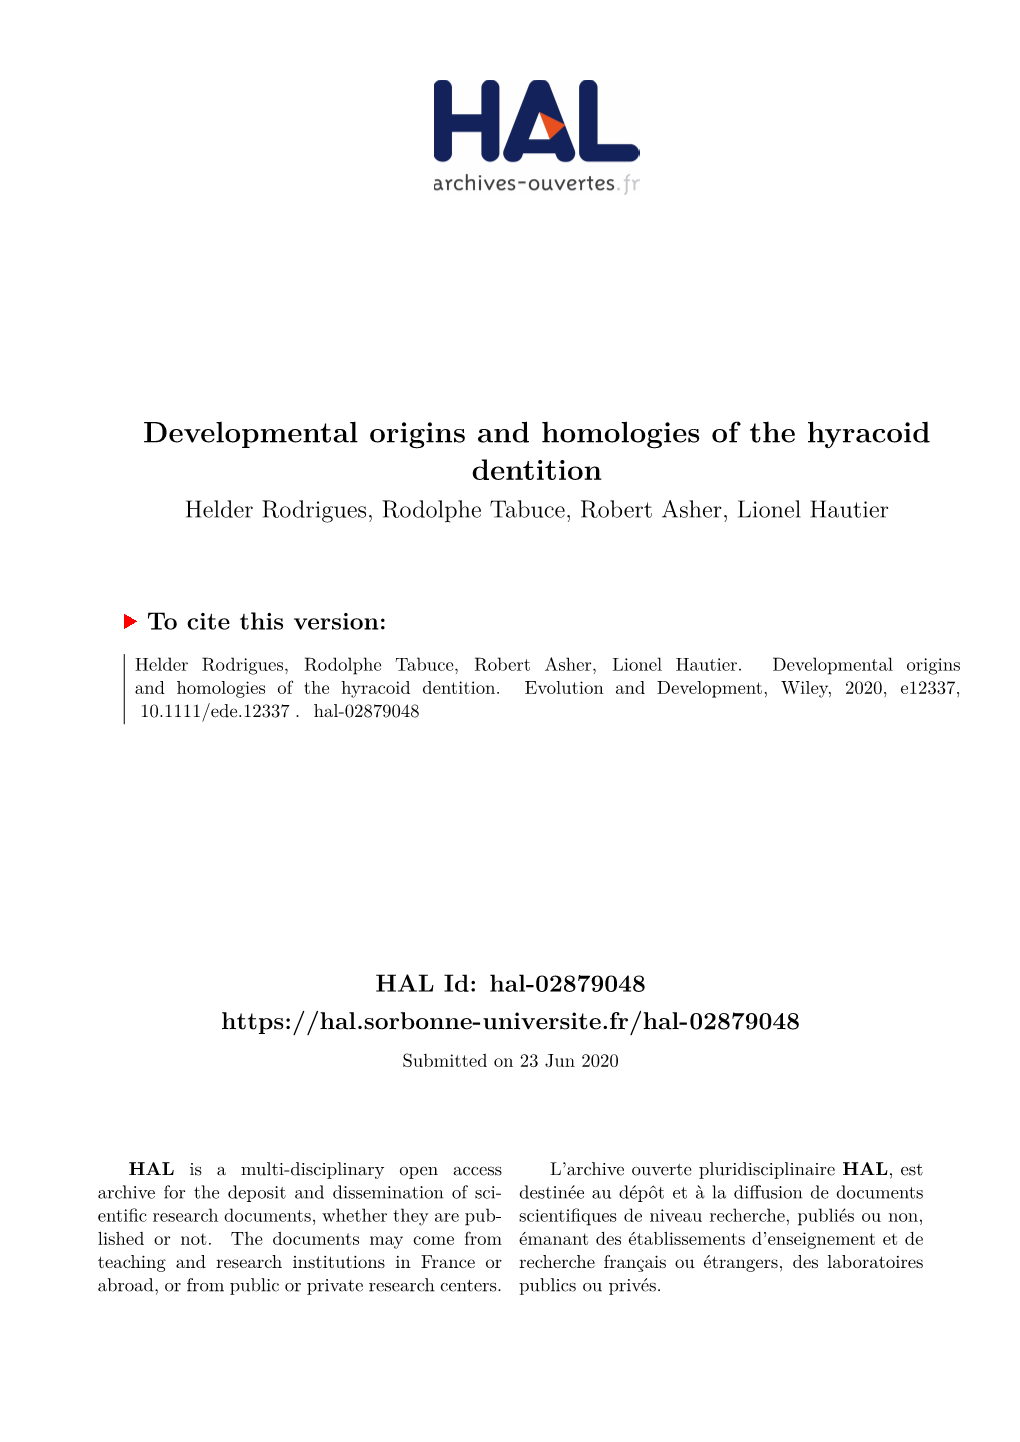 Developmental Origins and Homologies of the Hyracoid Dentition Helder Rodrigues, Rodolphe Tabuce, Robert Asher, Lionel Hautier